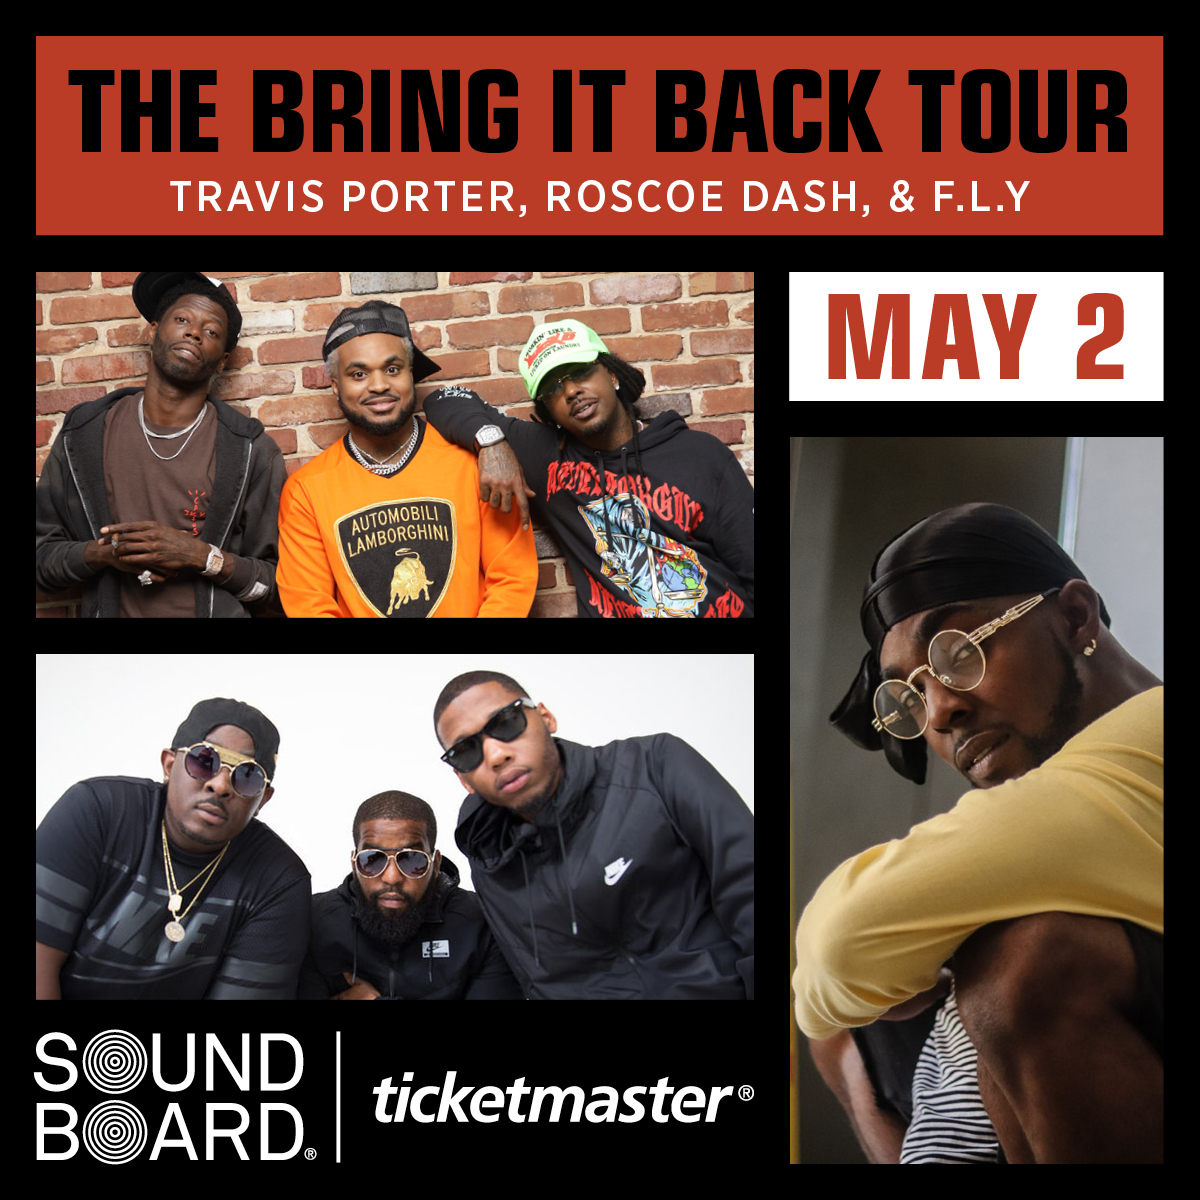 Get ready to bring back the good vibes with The Bring It Back Tour ft. Travis Porter, Roscoe Dash, and F.L.Y! May 2 at Sound Board. Get your tickets now! 🎫👉 playm.cc/3HQh4nD